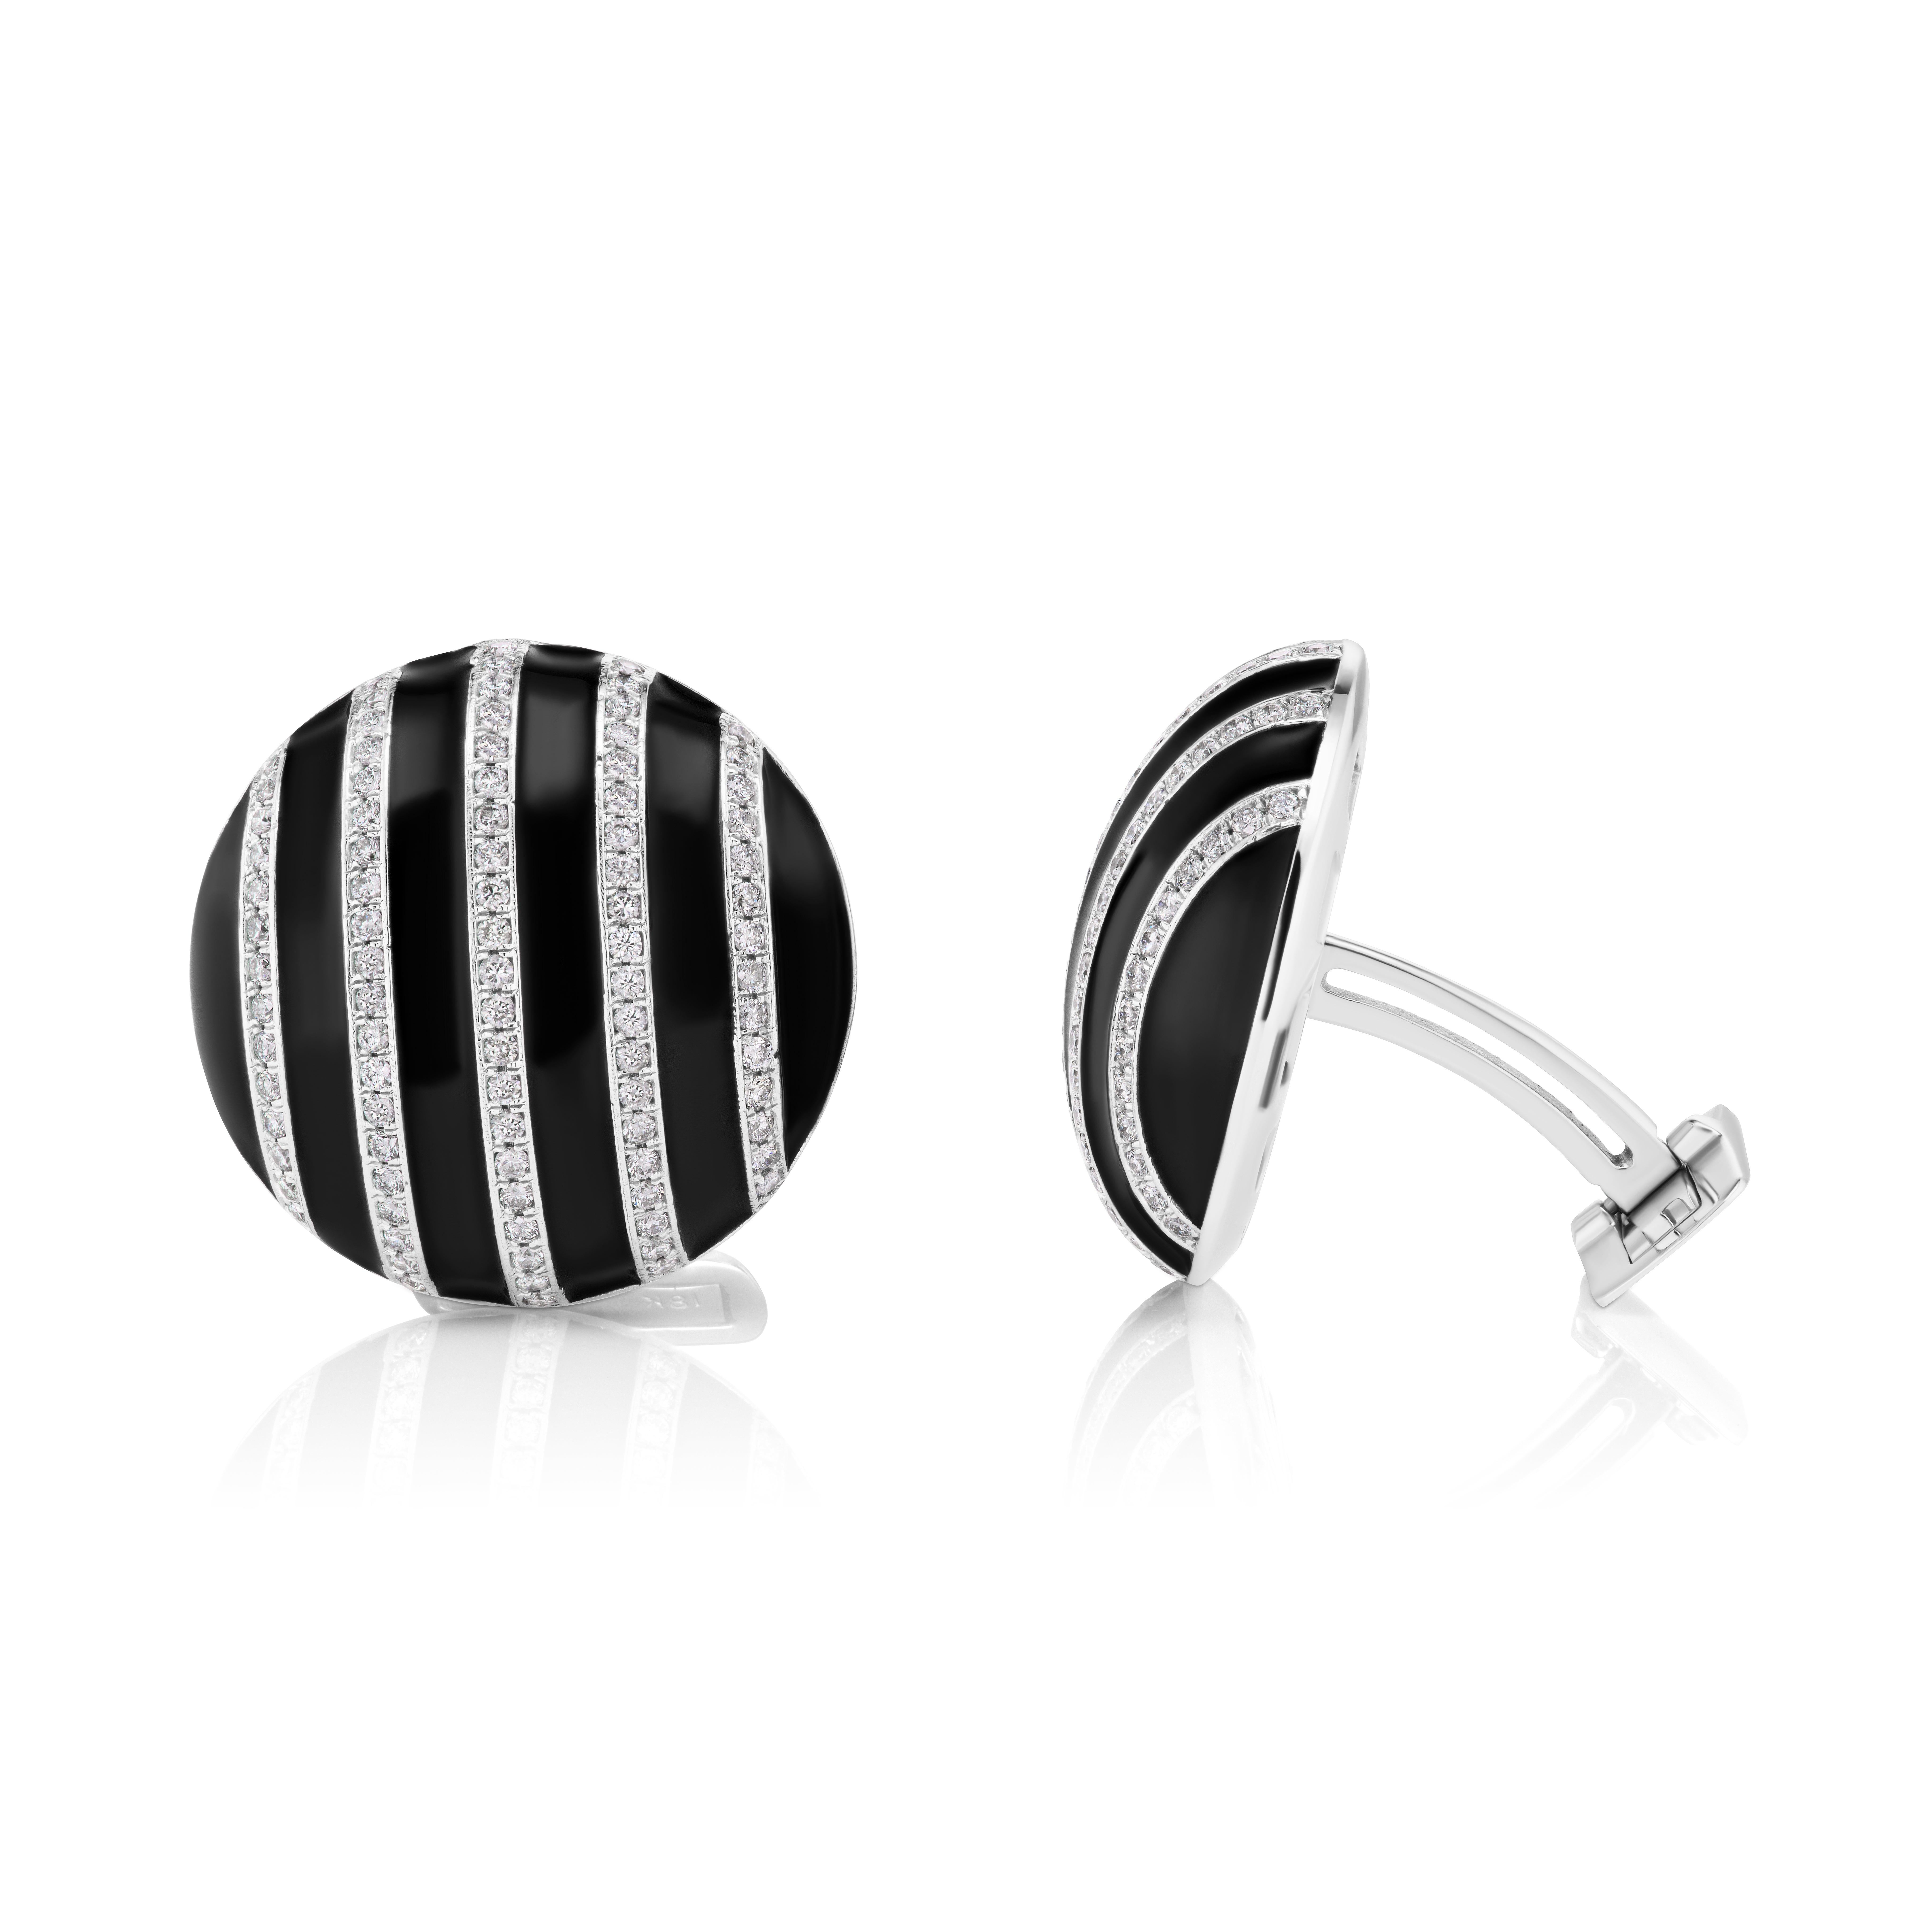 Diamond and Black Enamel Cufflink In New Condition For Sale In New York, NY